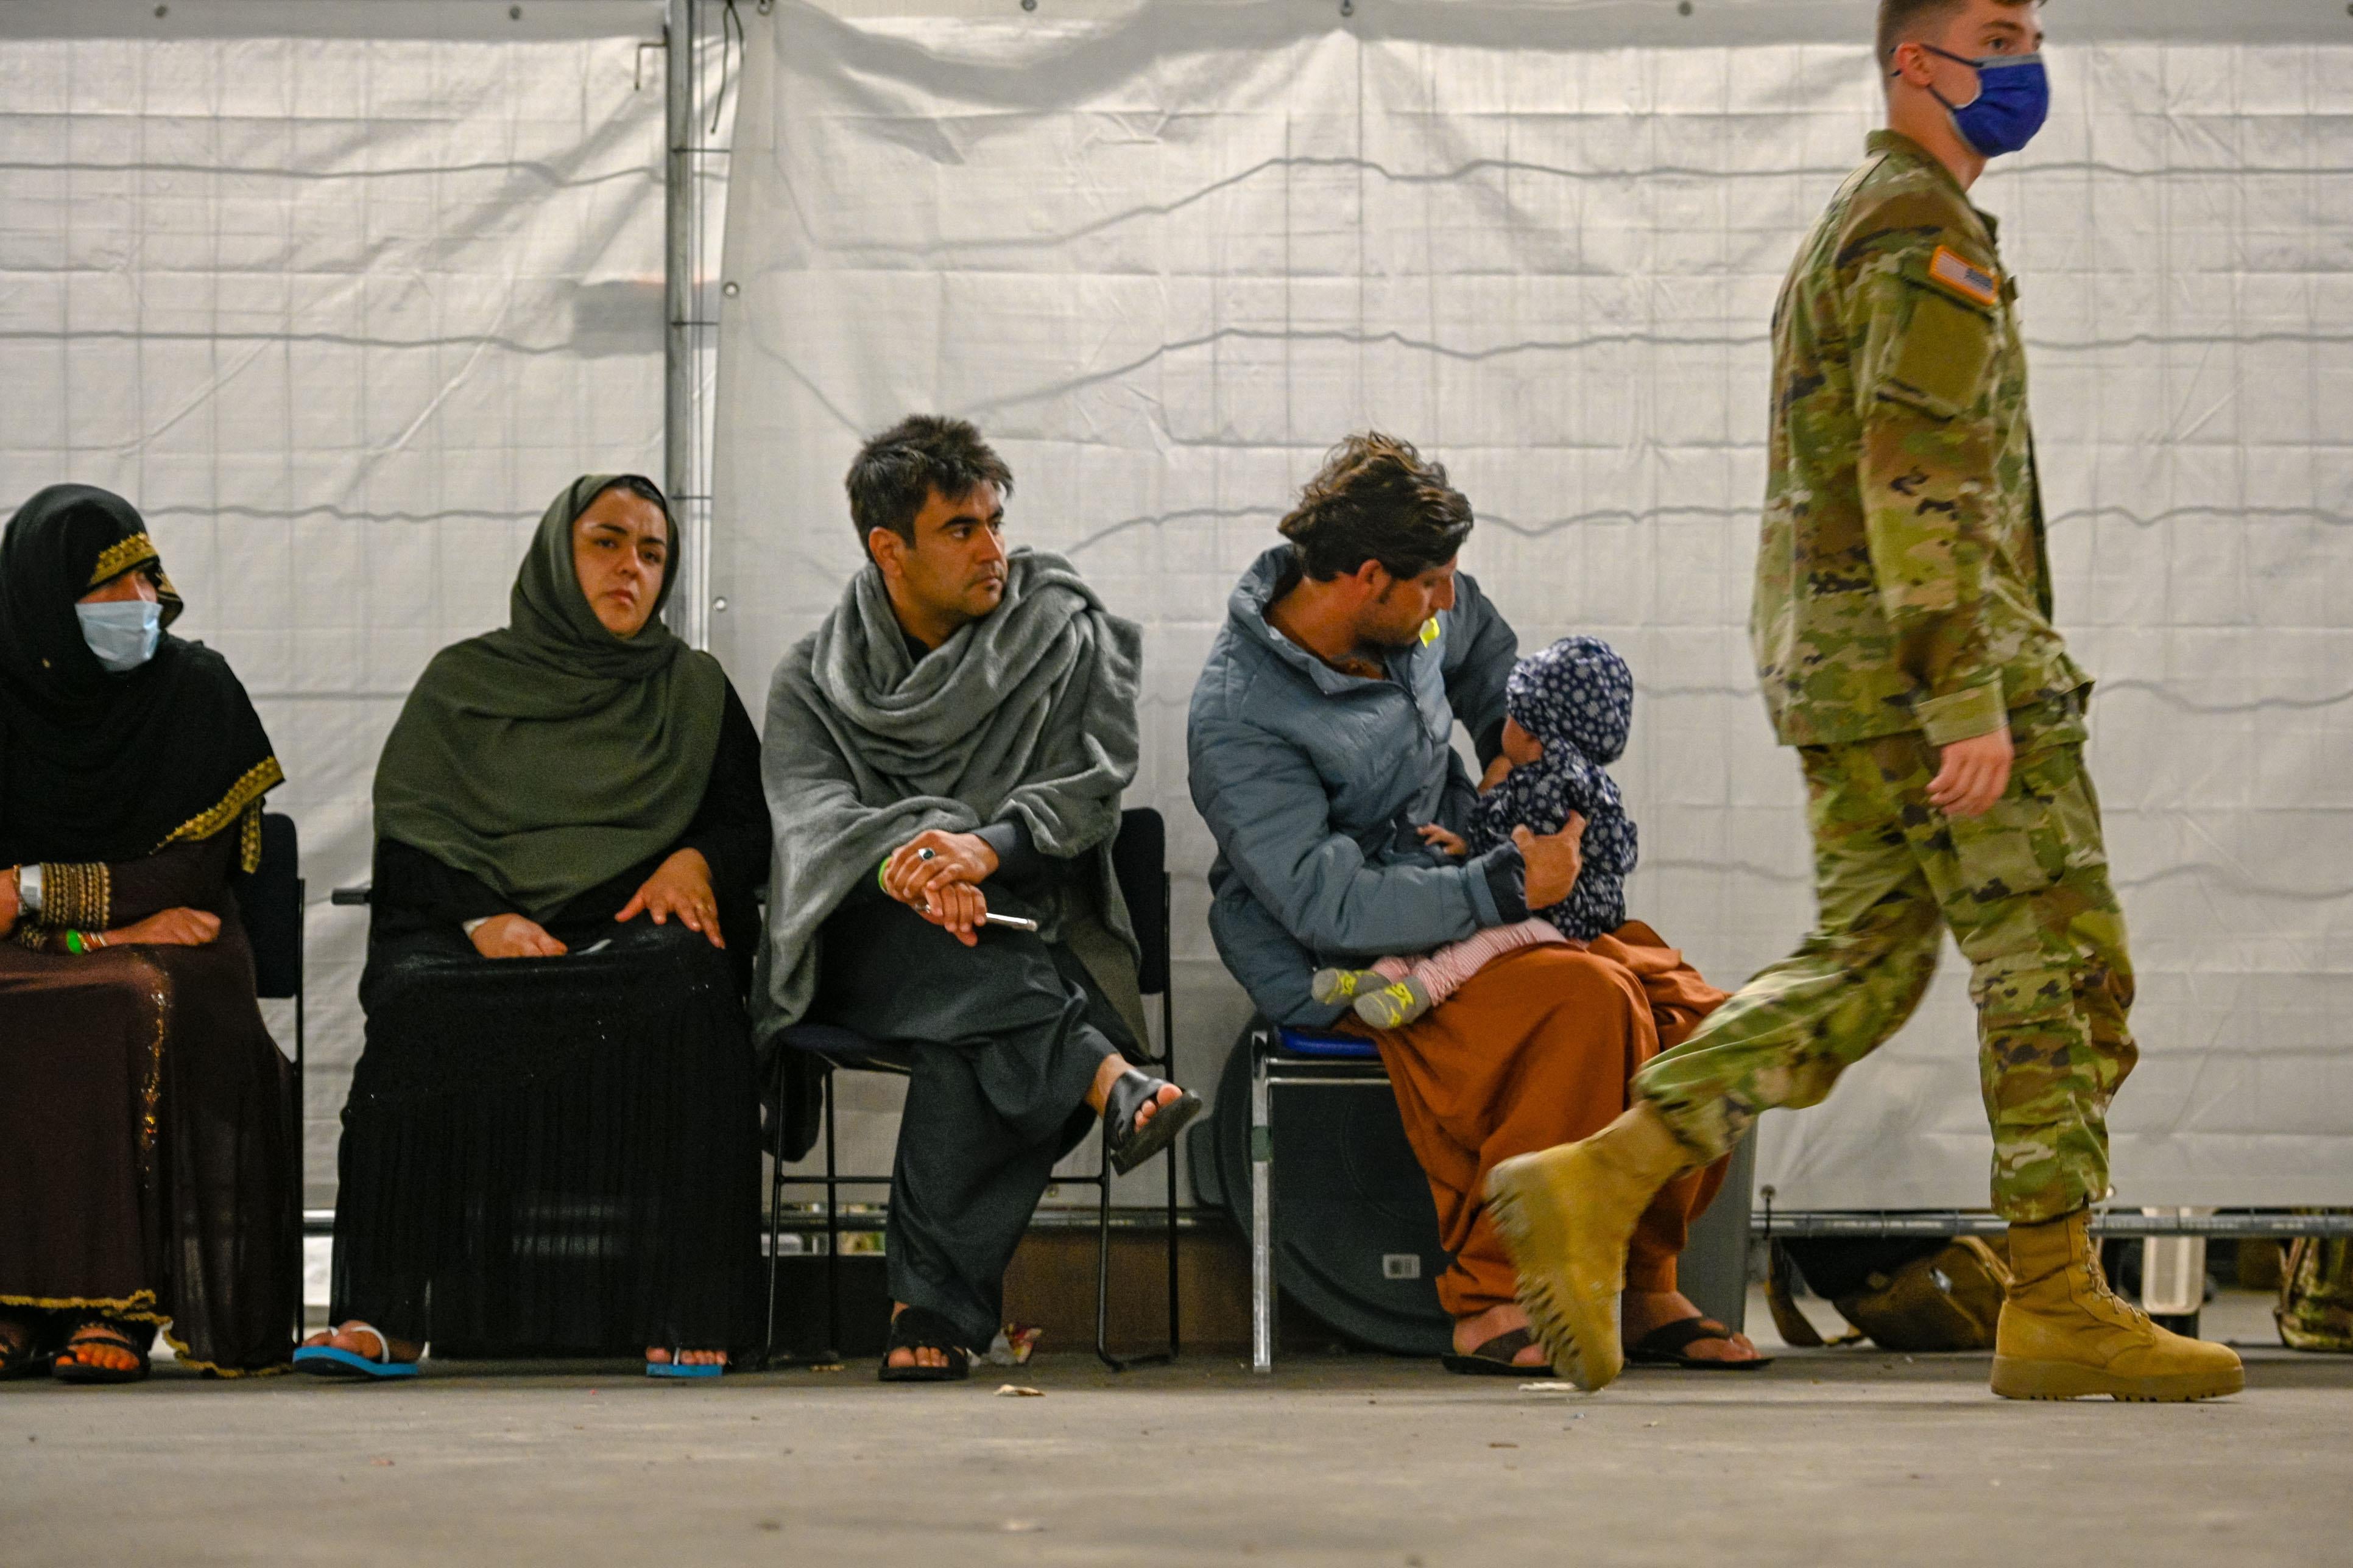 Two women in headscarves and two men, one holding a child in his lap, sit in folding chairs as a man in military fatigues and a mask walks by.